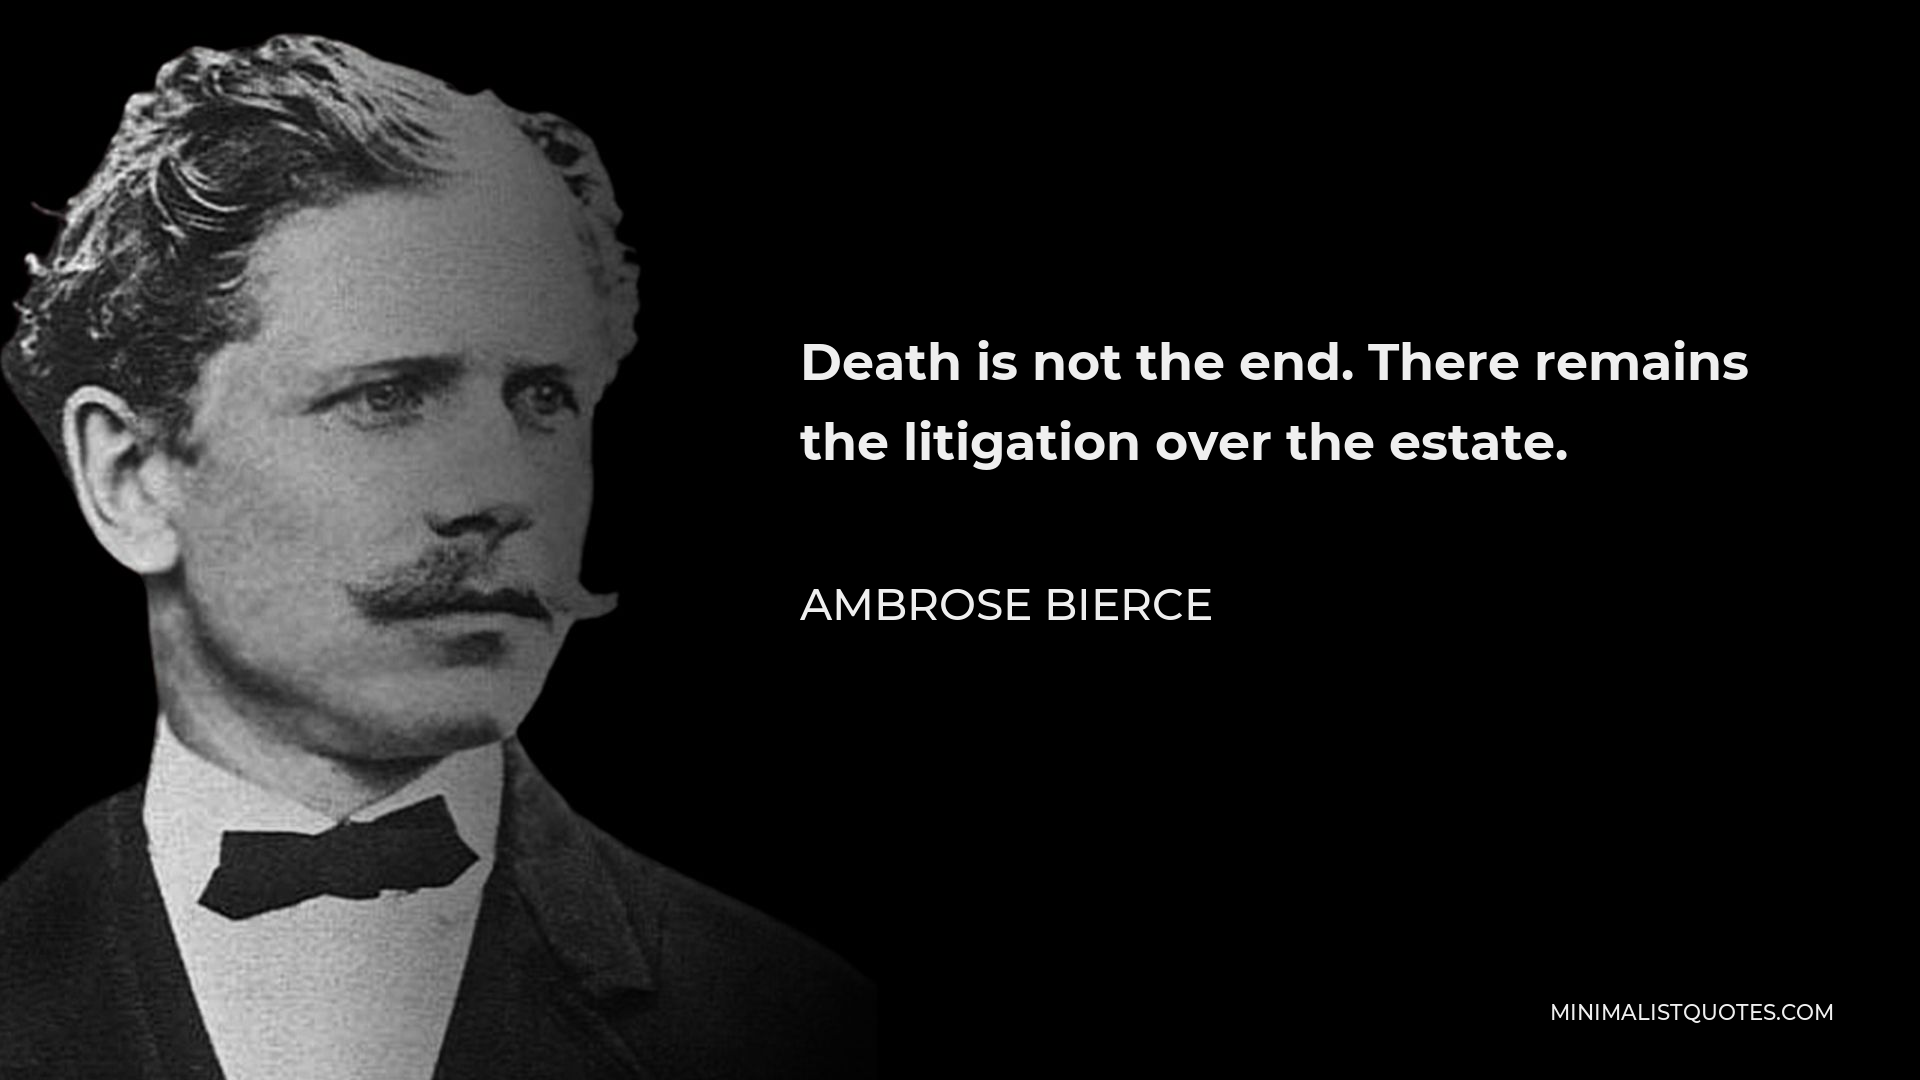 Ambrose Bierce Quote - Death is not the end. There remains the litigation over the estate.